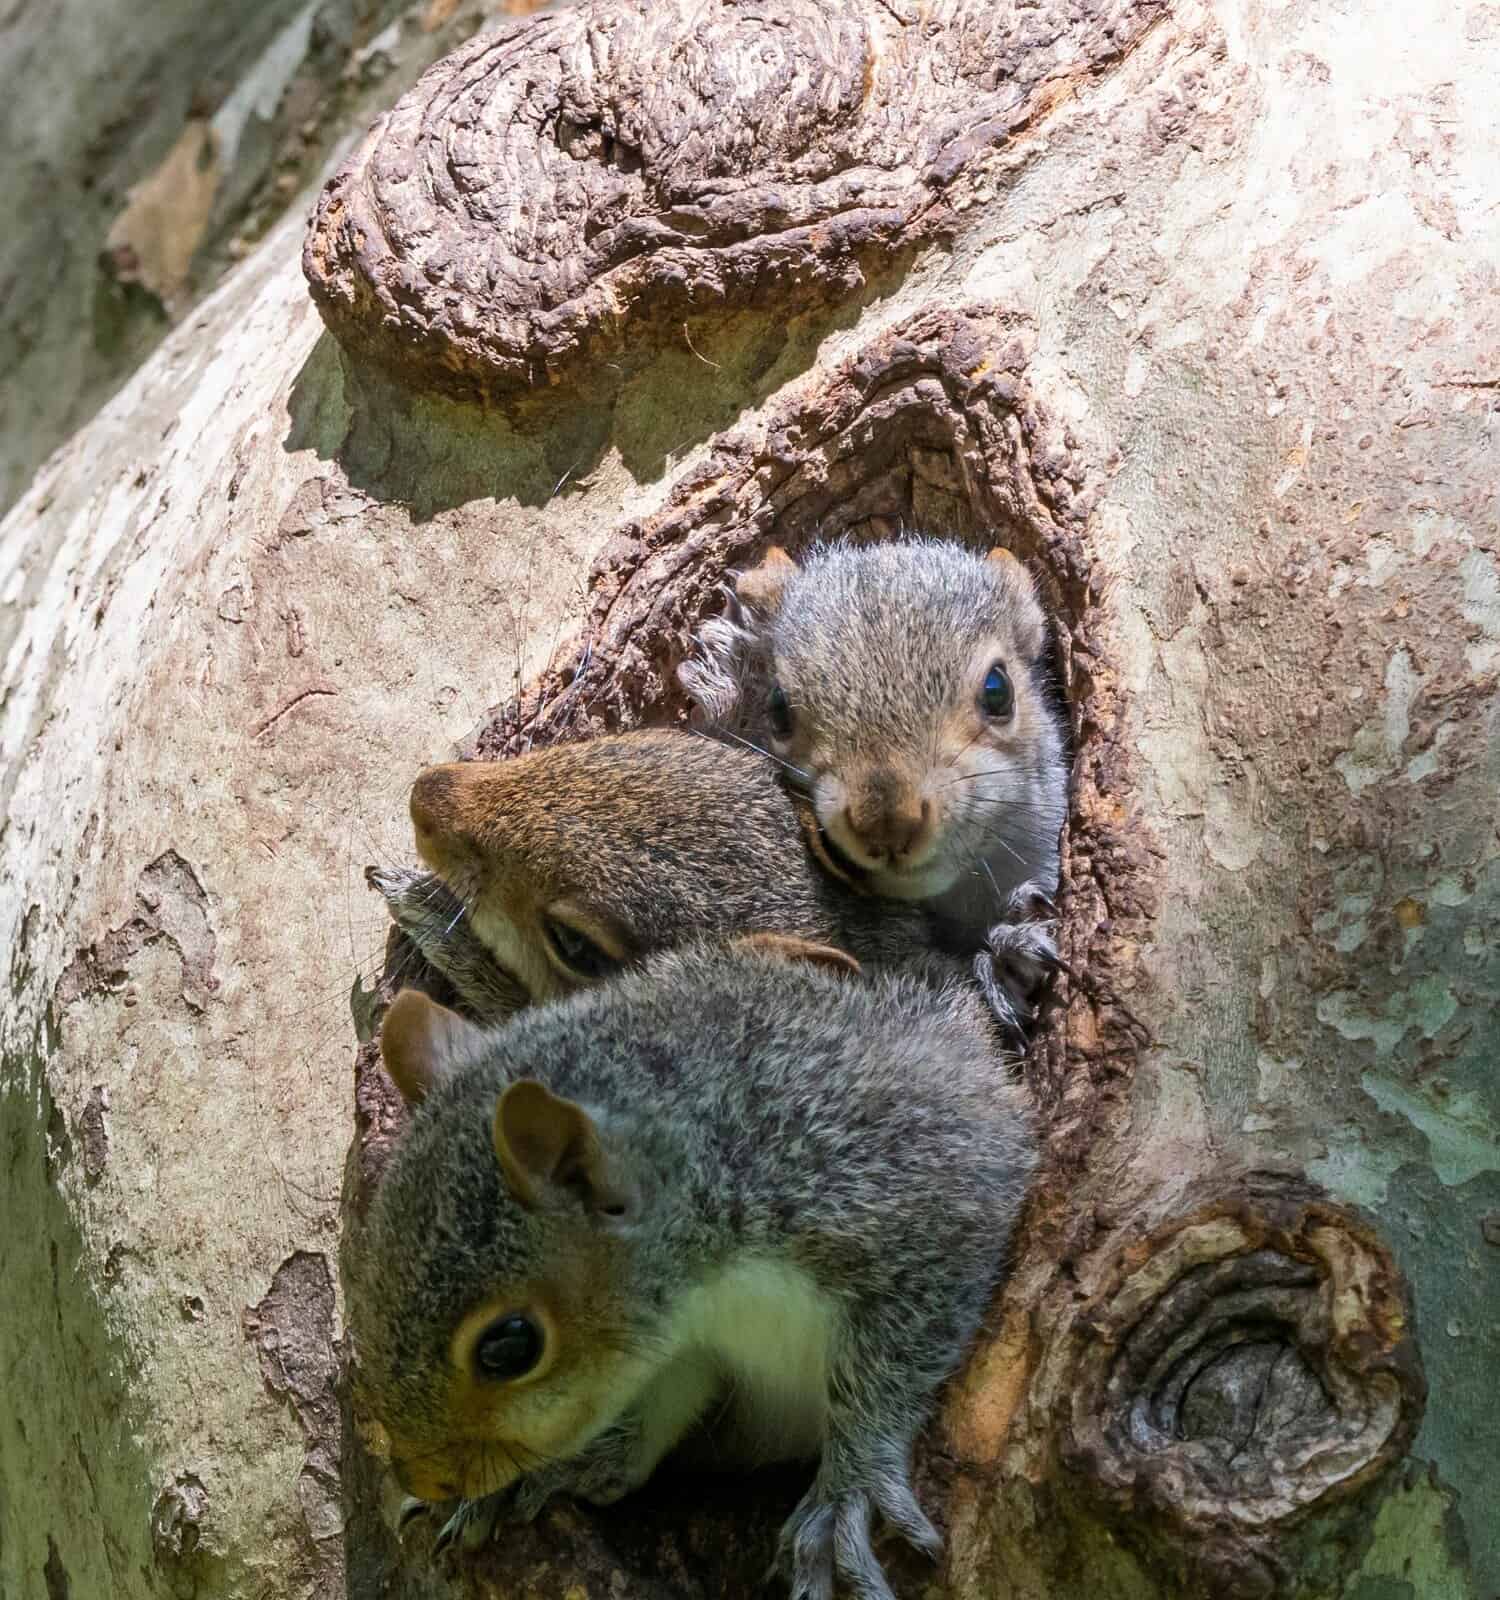 Family of baby squirrels peaking out of tree nest